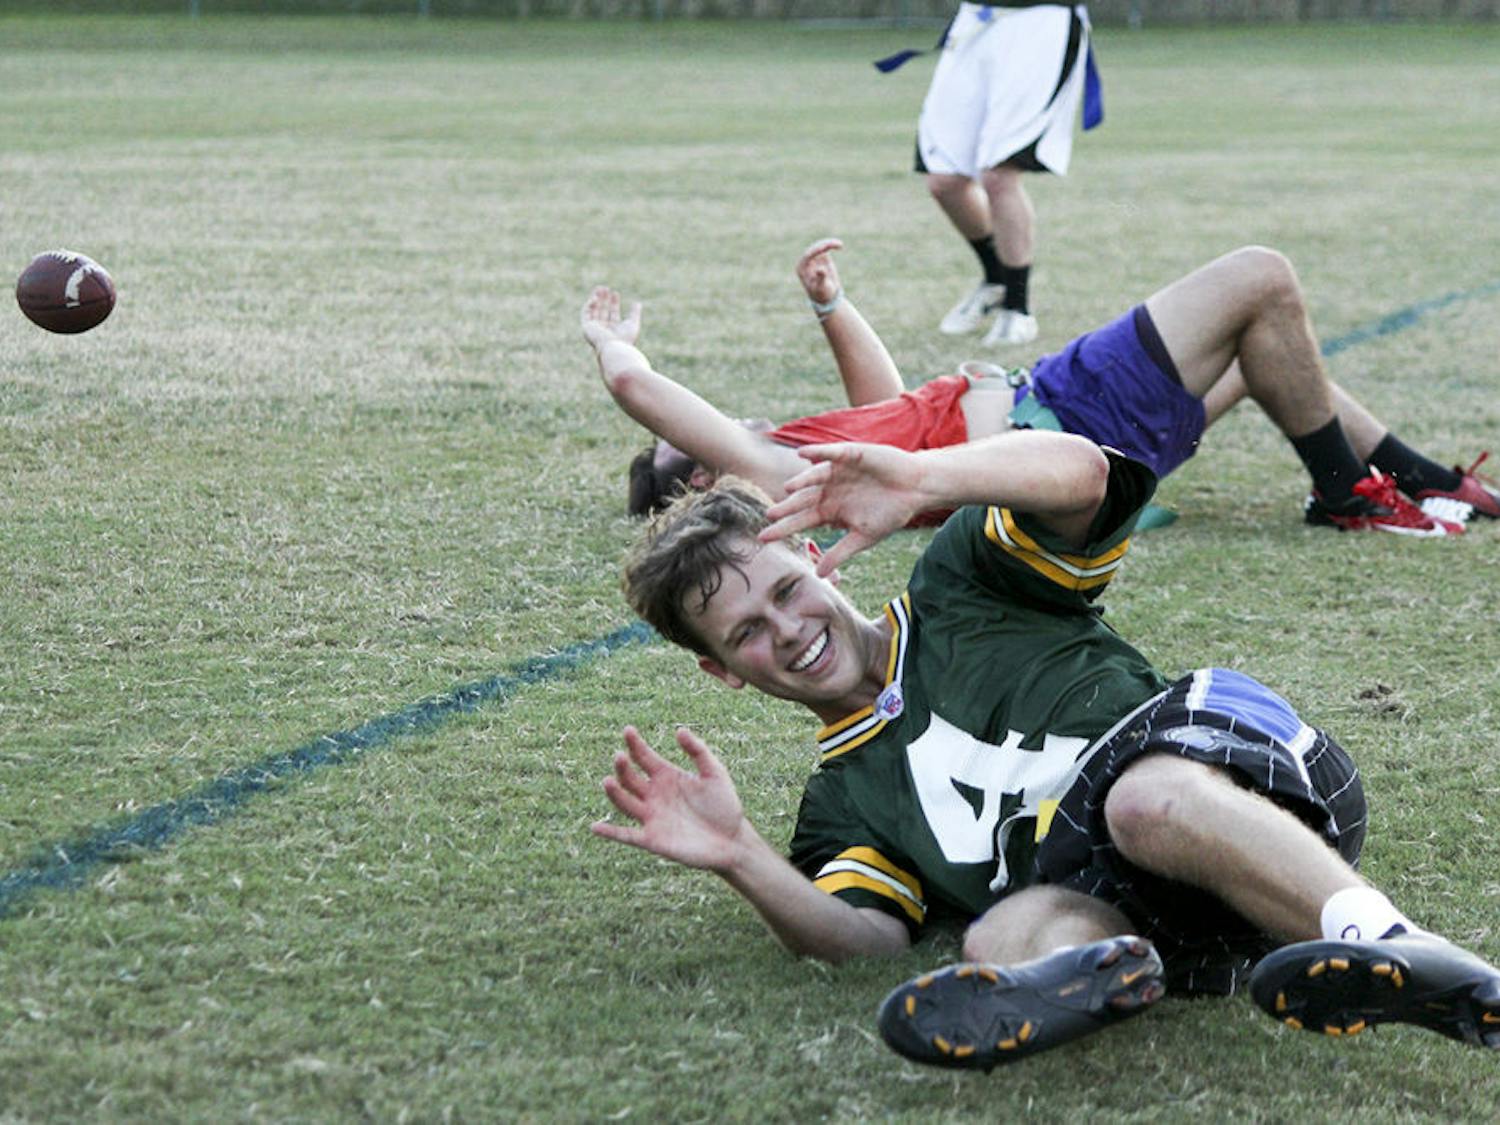 Michael Hauer, 21, falls while playing quarterback for the Chuggernauts in a flag football scrimmage against Campus Diplomats on Thursday.